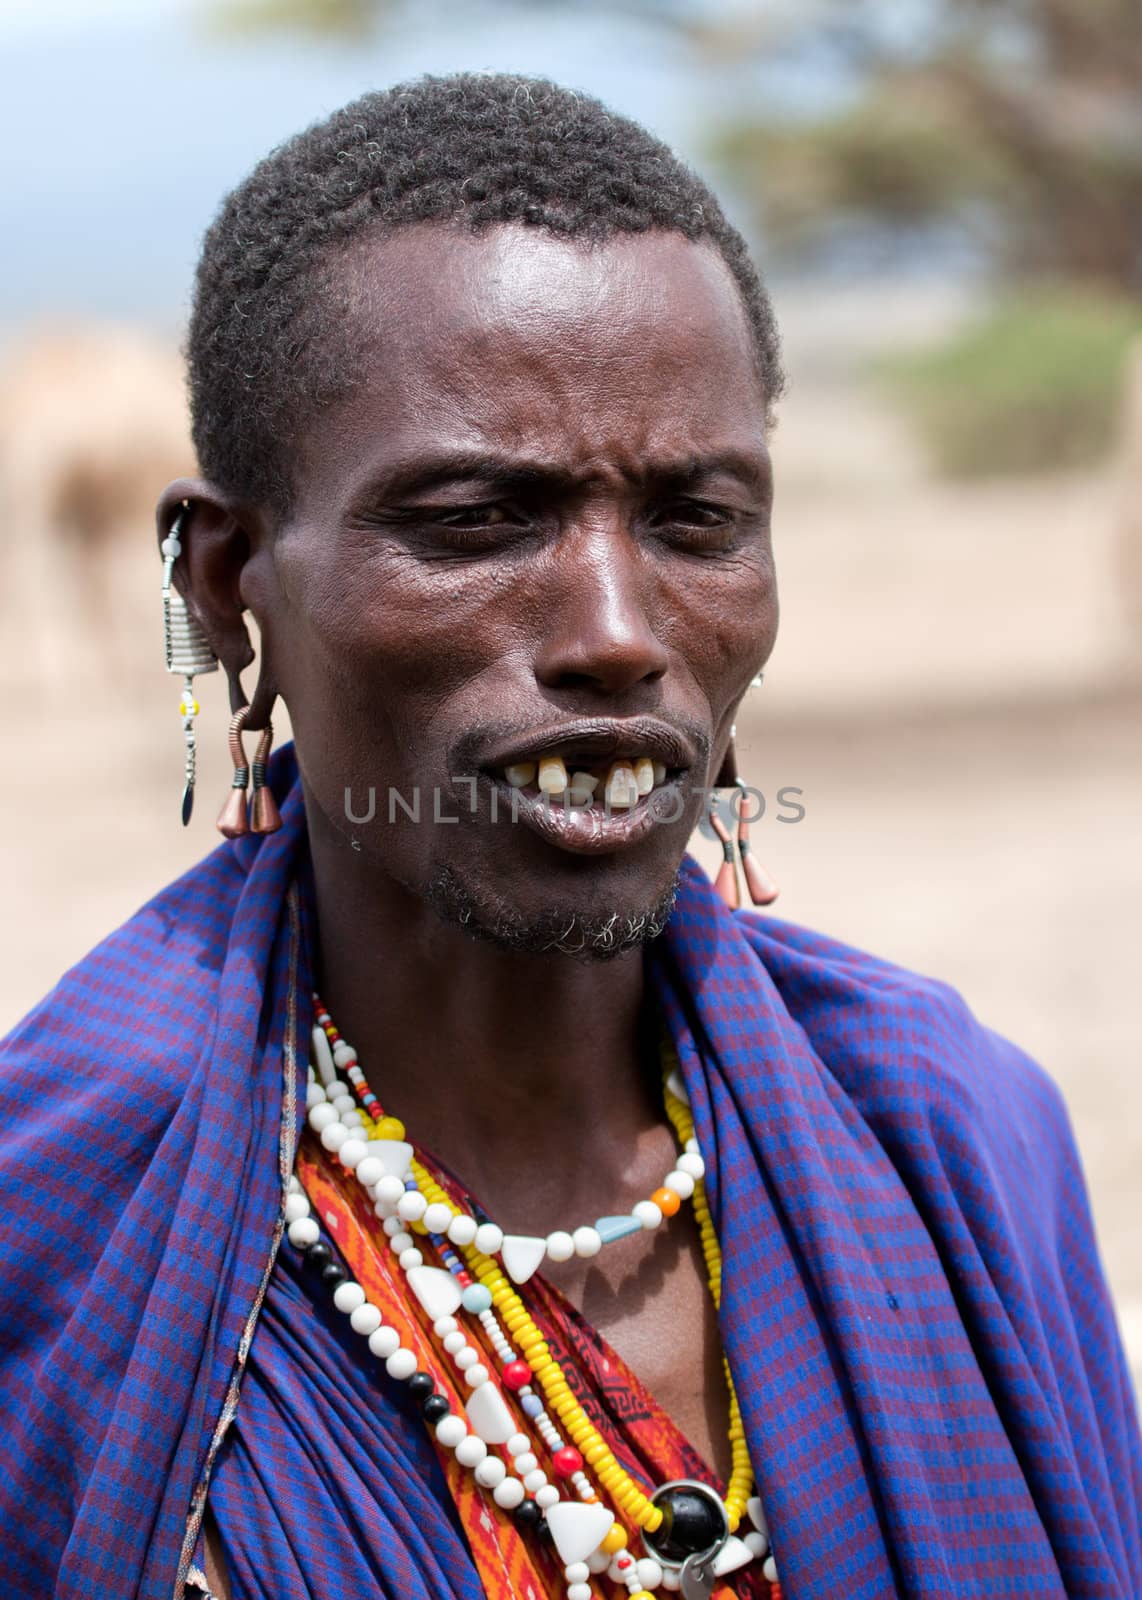 Ngorongoro Conservation Area, TANZANIA, AFRICA - DECEMBER 11: Maasai man portrait in traditional clothes on December 11, 2012 in Ngorongoro Tanzania. Maasai people are among the best known of African ethnic groups, due to their residence near the many game parks of East Africa, and their distinctive customs and dress